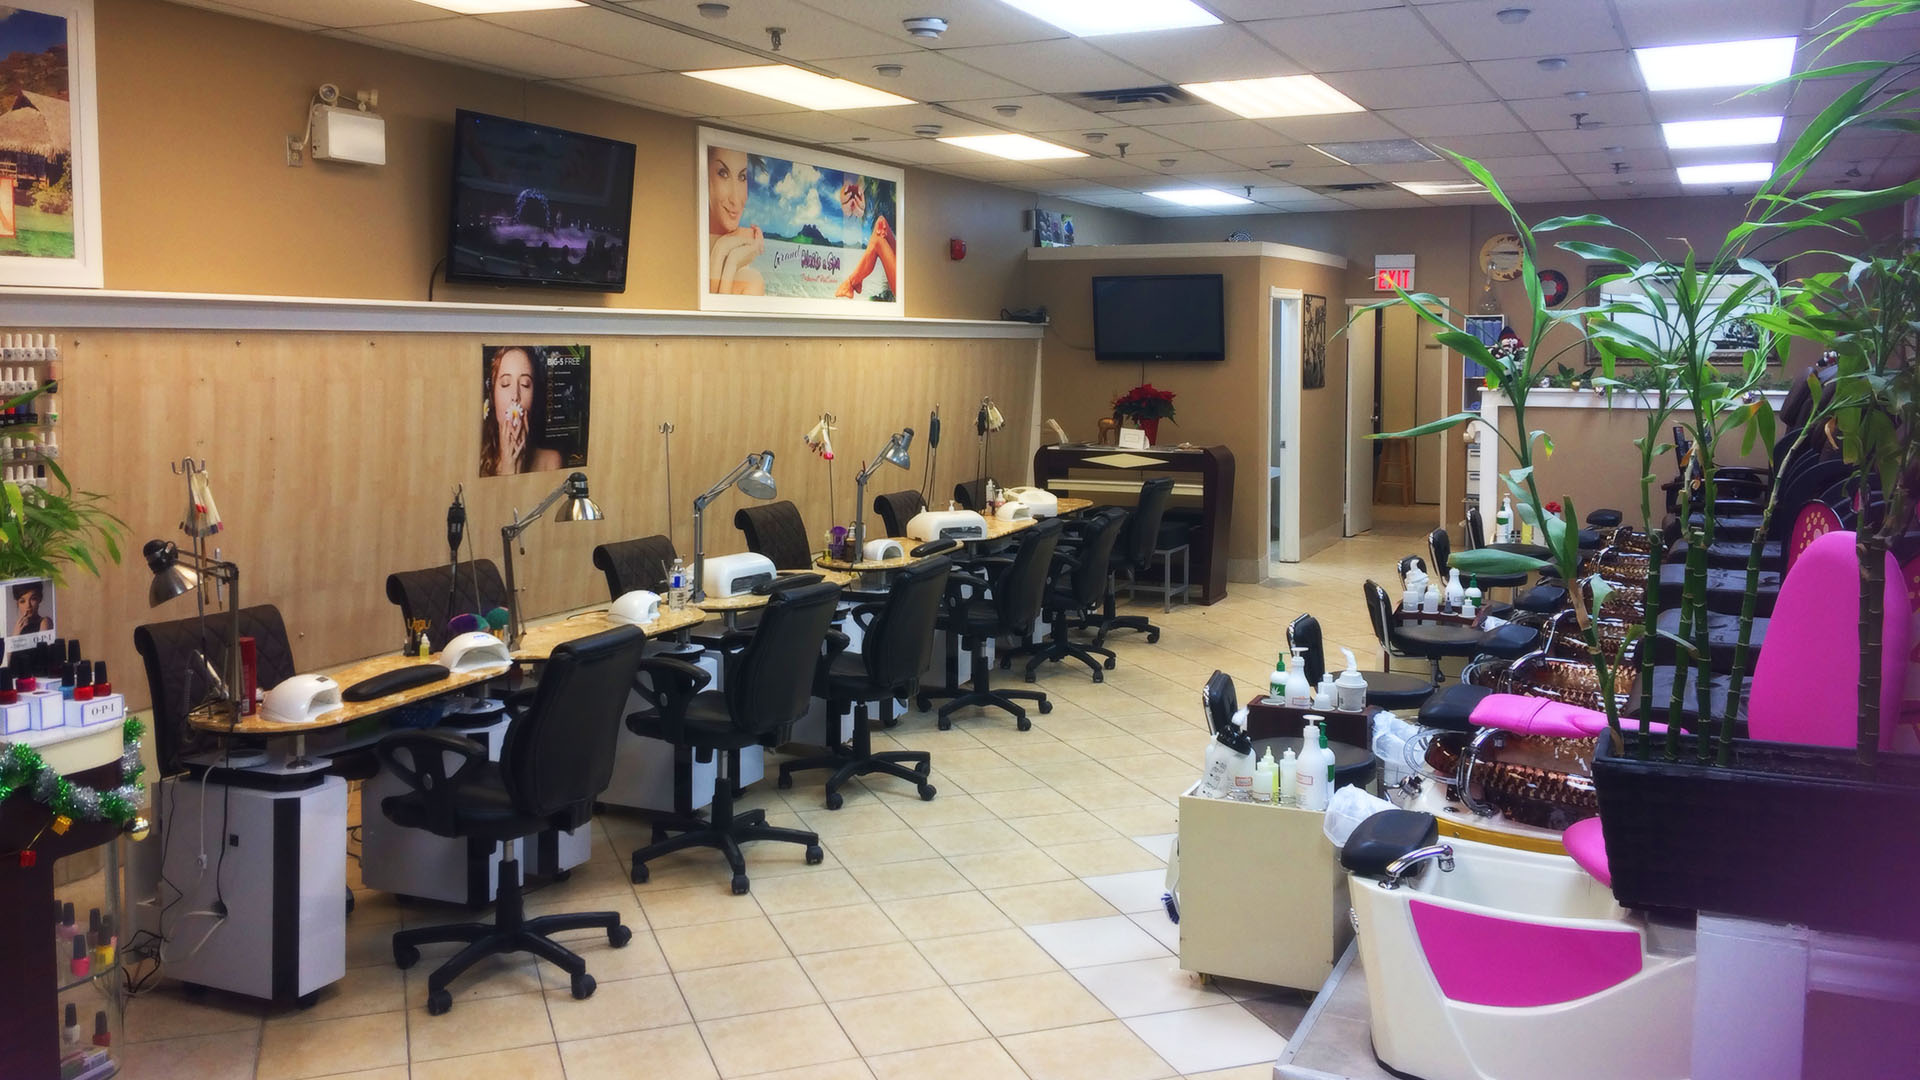 Grand Nailspa in Mansfield, TX 76063 | Cool places to visit, Mansfield,  Grands